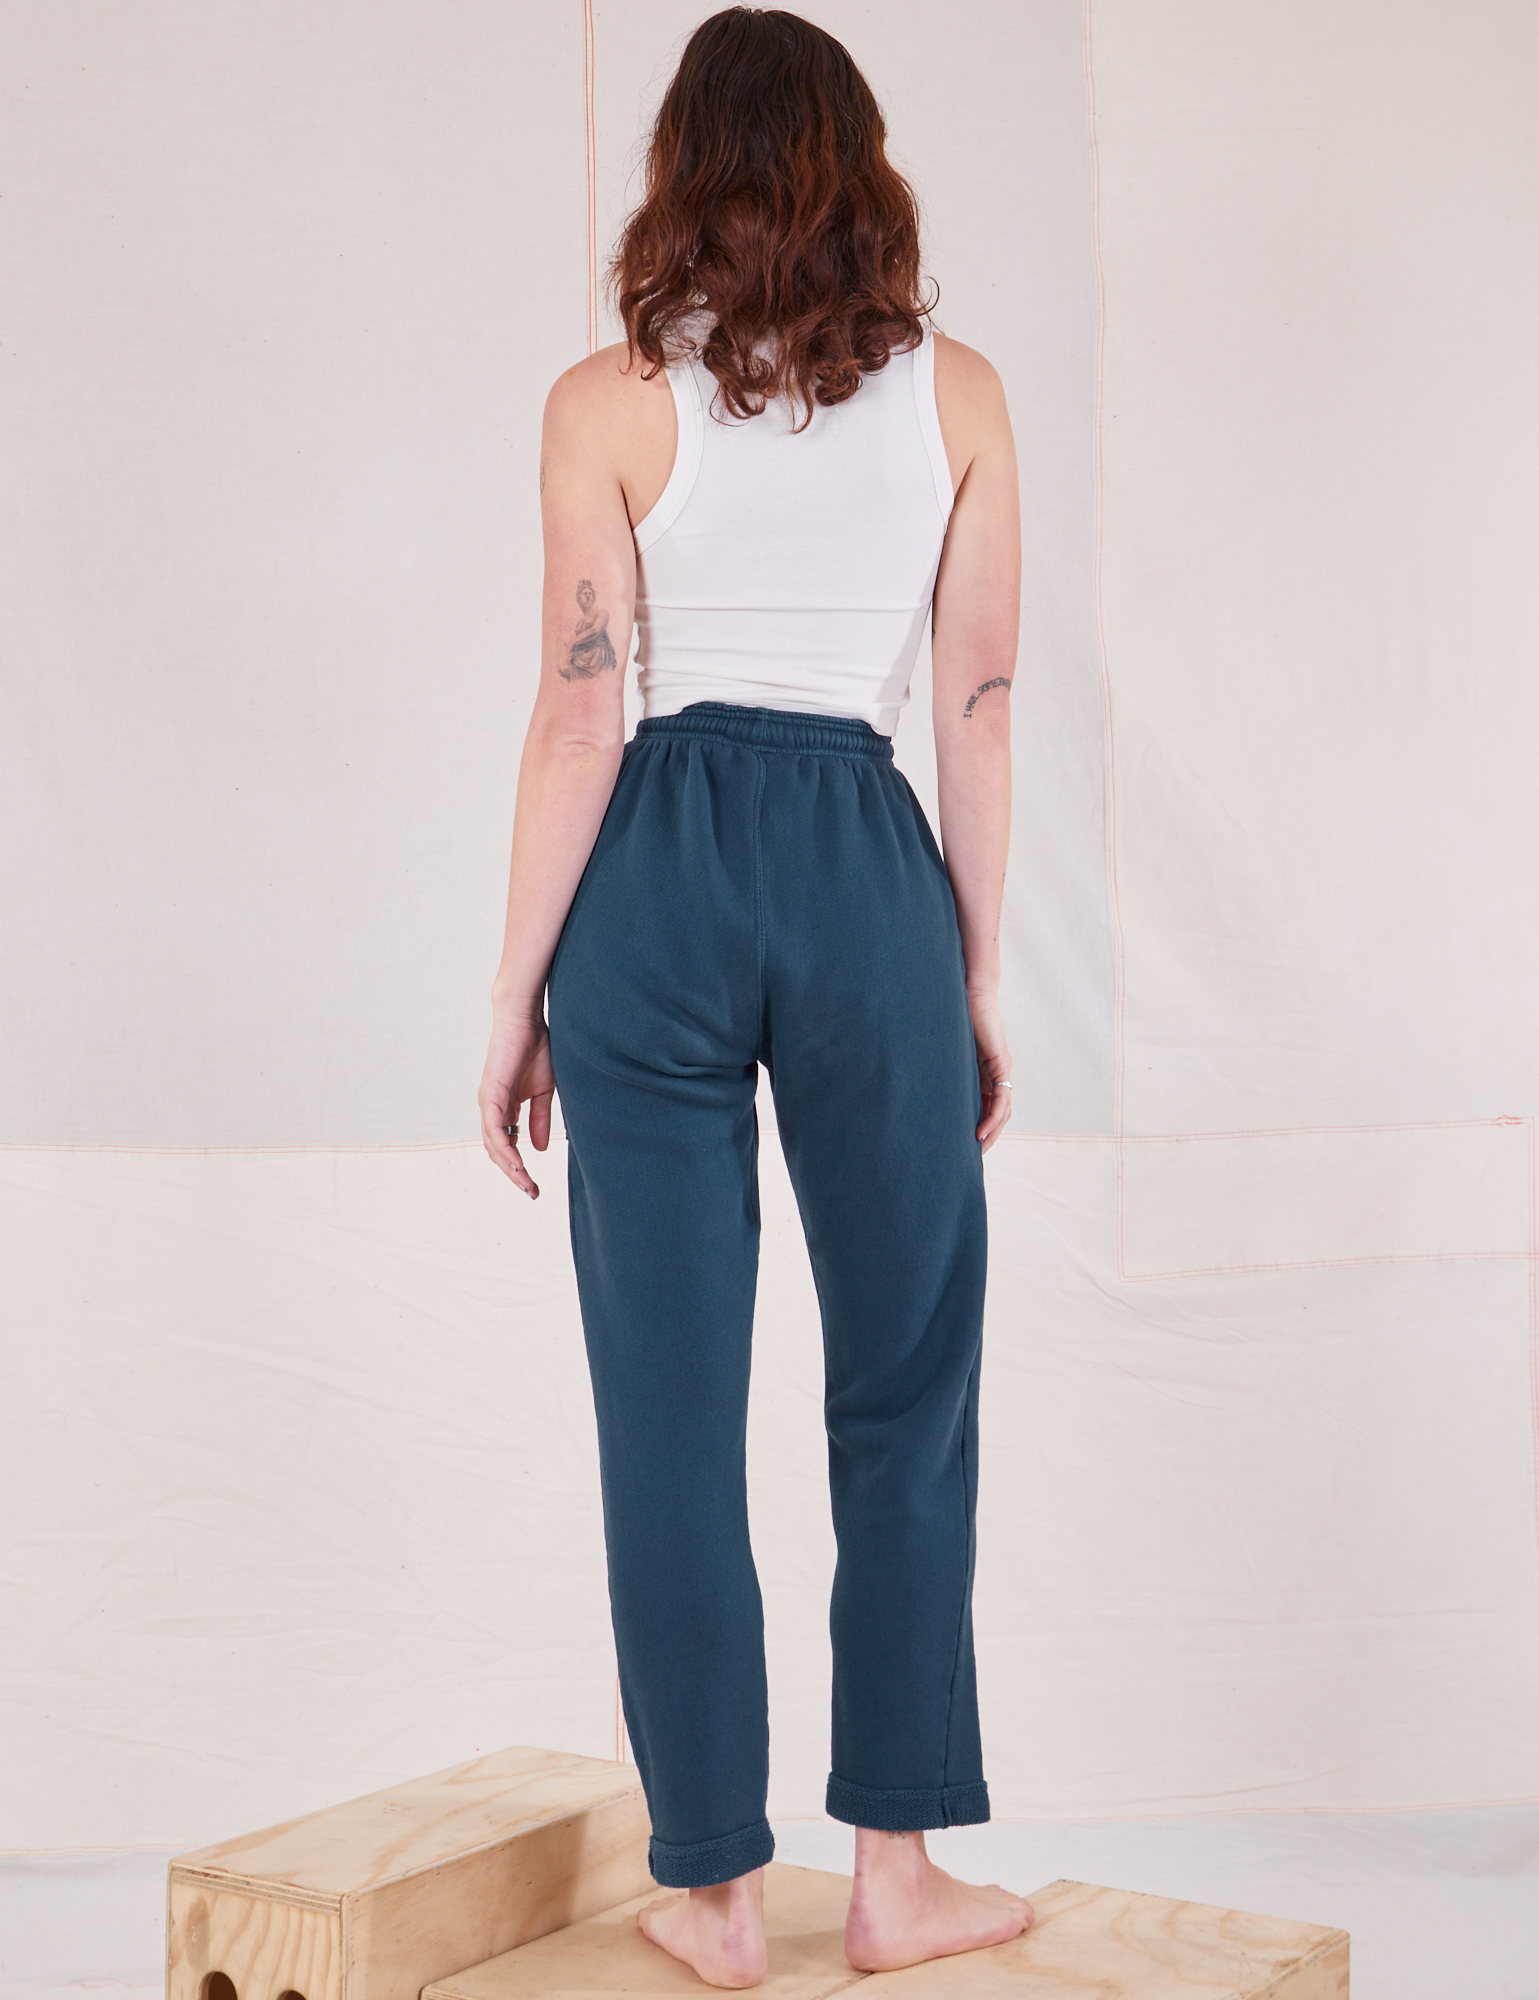 Back view of Rolled Cuff Sweat Pants in Lagoon and Cropped Tank in vintage tee off-white on Alex